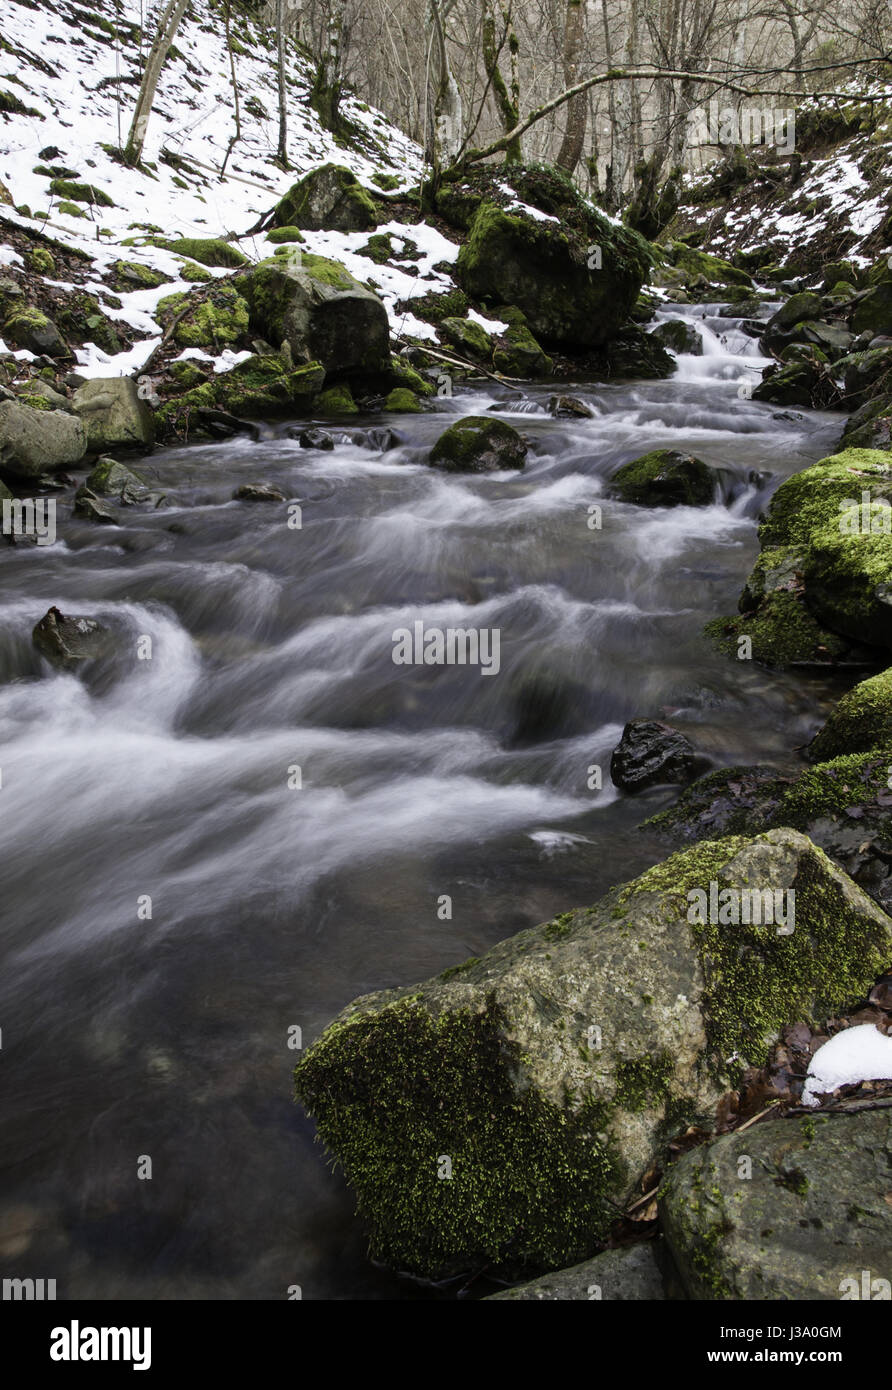 River, mountain, detail of a river in nature, environment Stock Photo